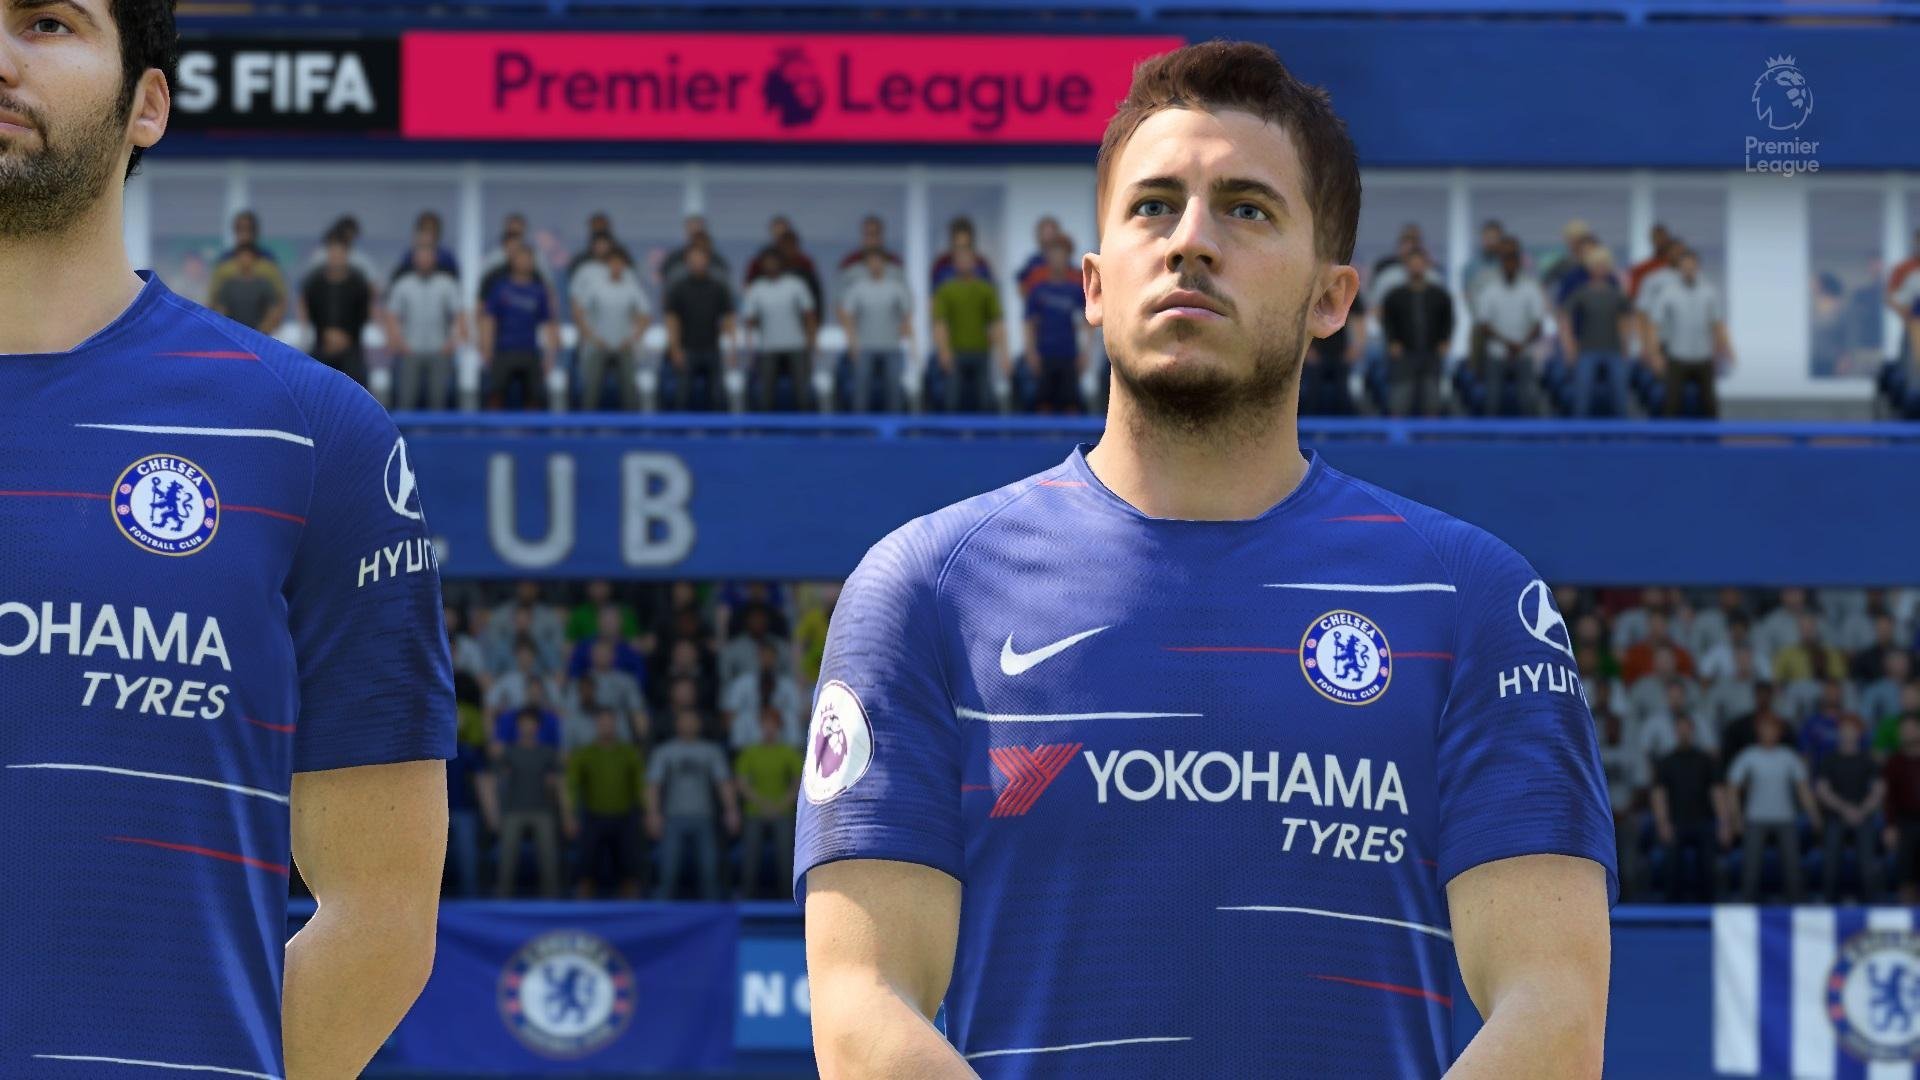 FIFA 20: Chelsea Career Mode Guide, Tranfers, Tactics, Formations and Tips